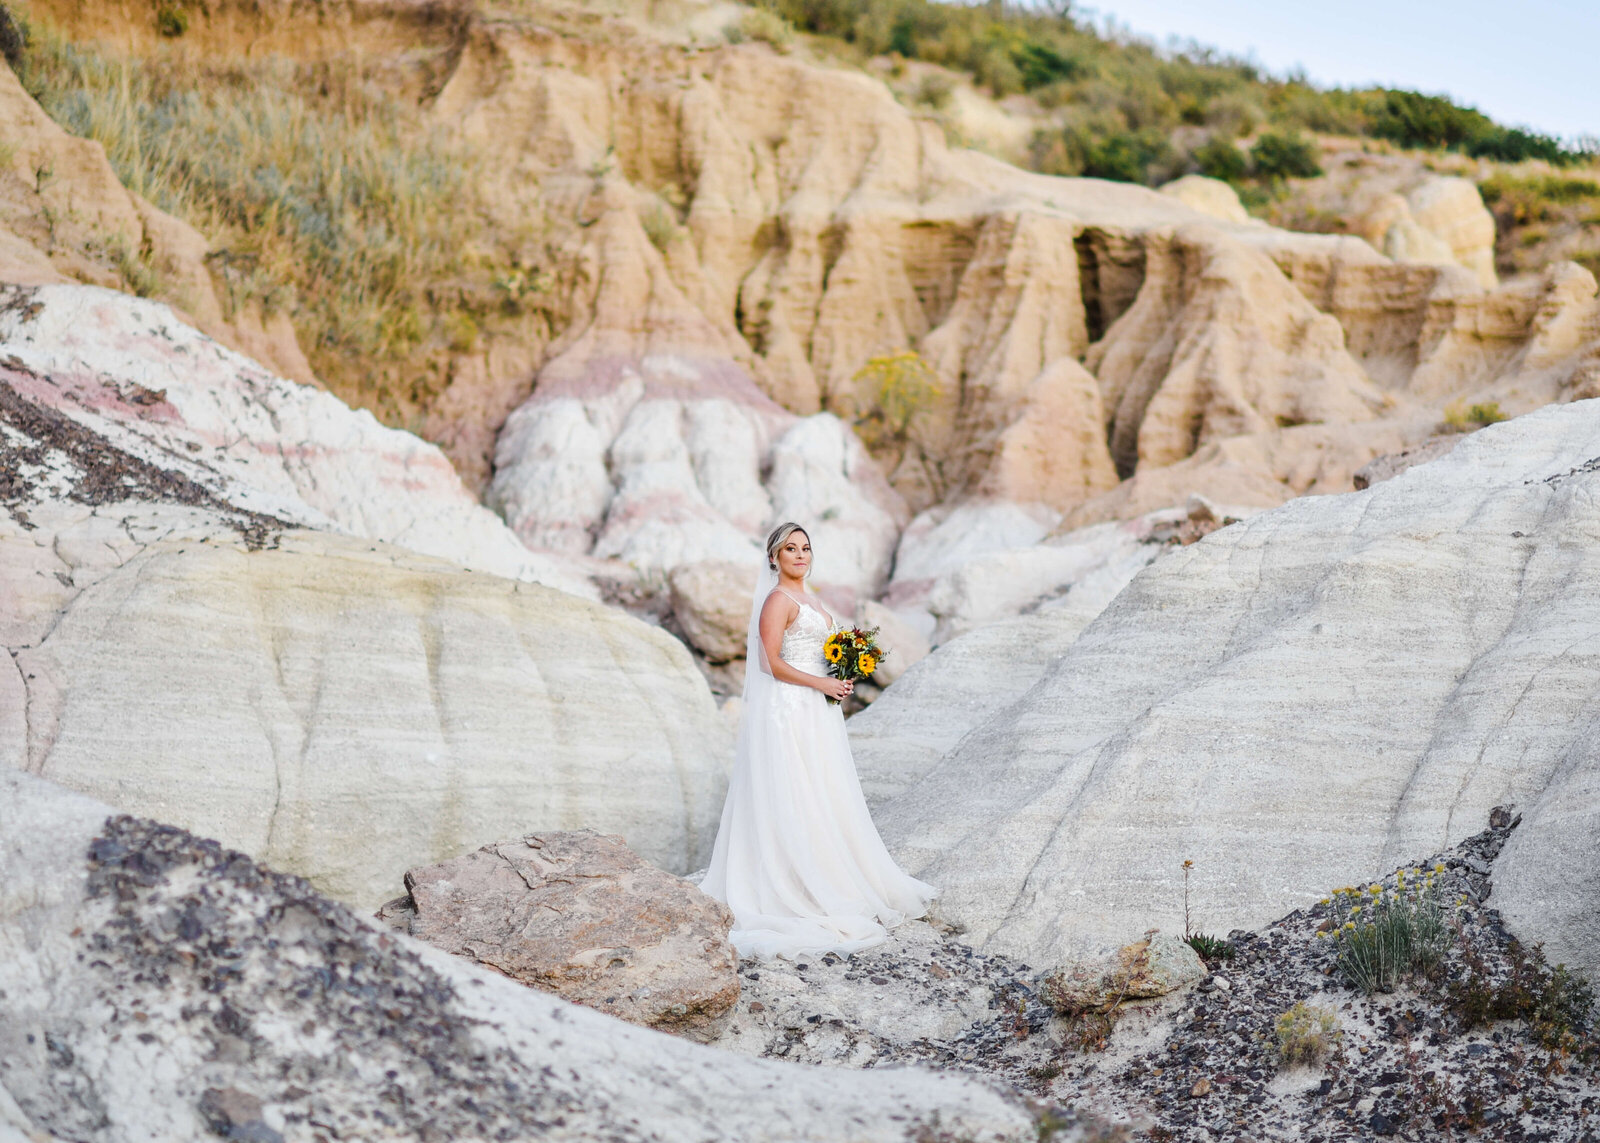 Bride in a white flowing gown holds flowers and stands on a picturesque rock